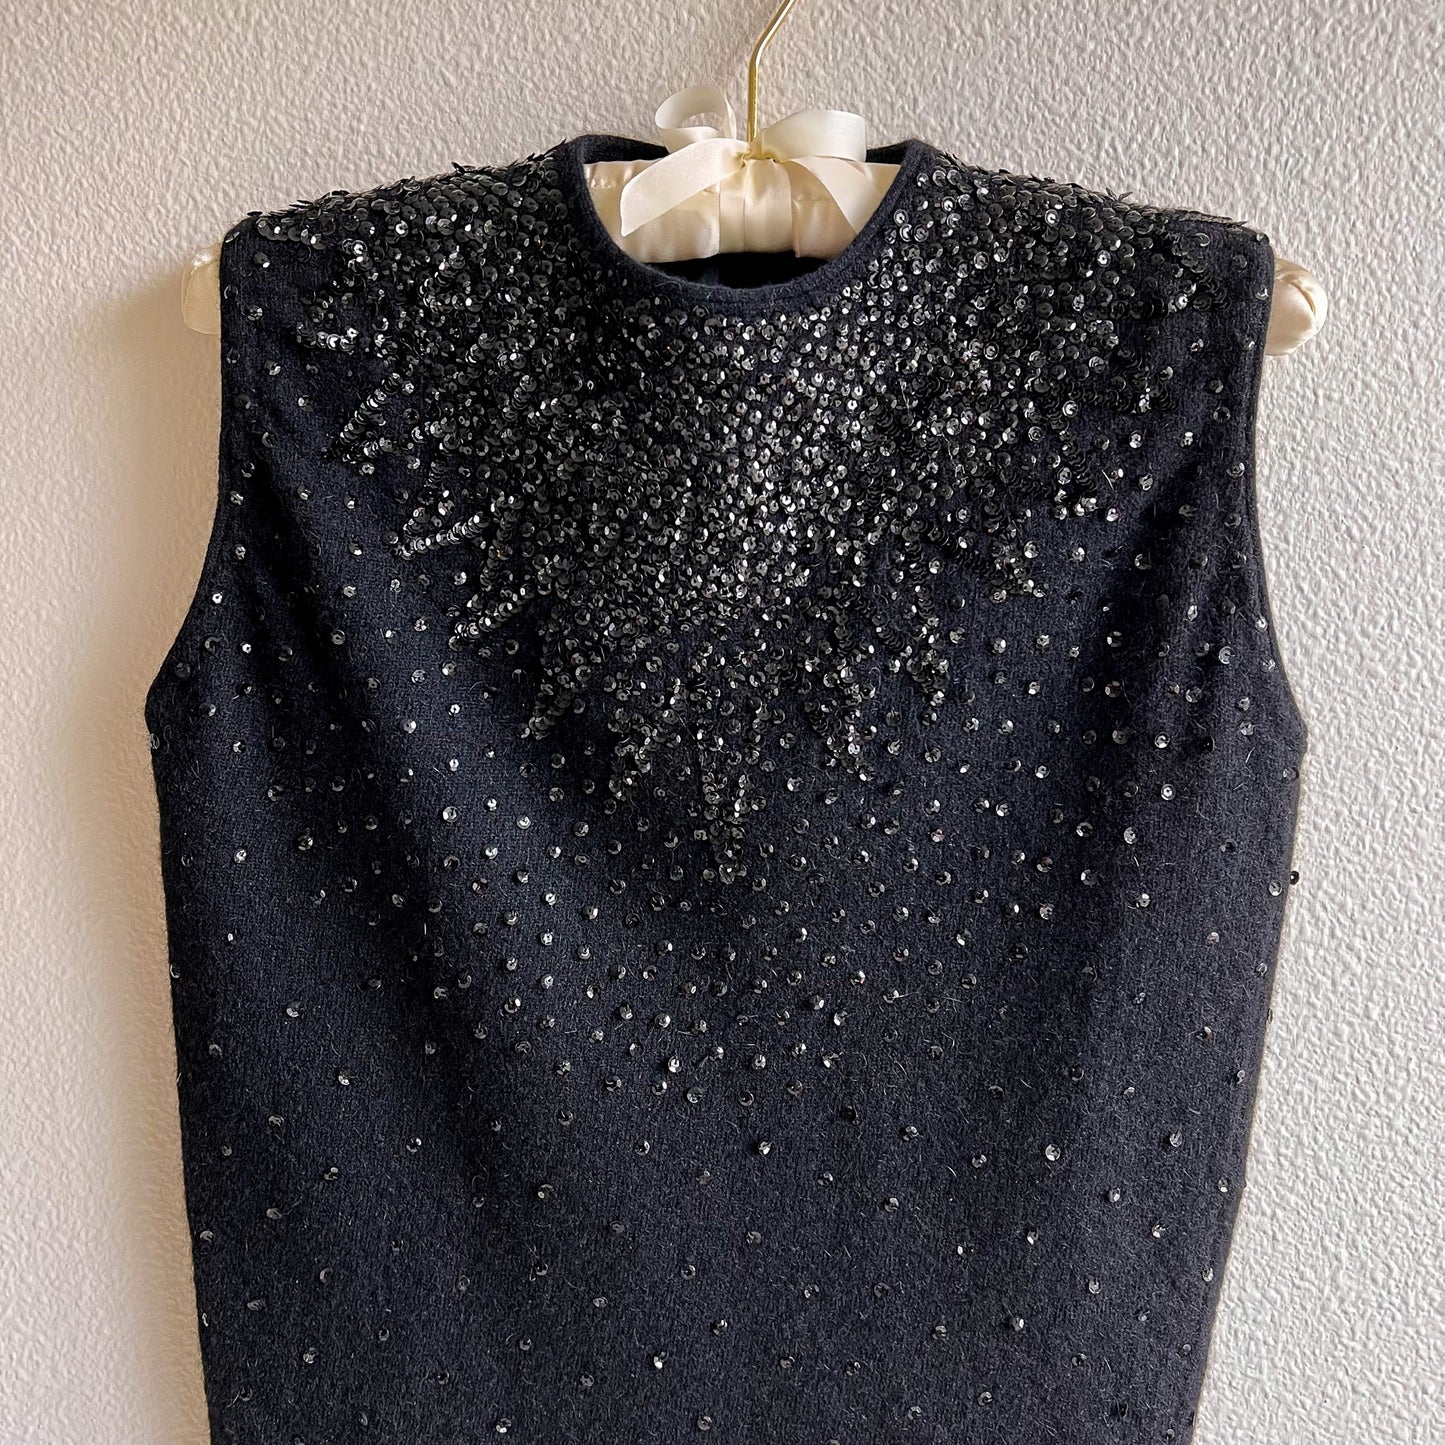 1960s Black Knit Sweater Top With Sequins (S/M)